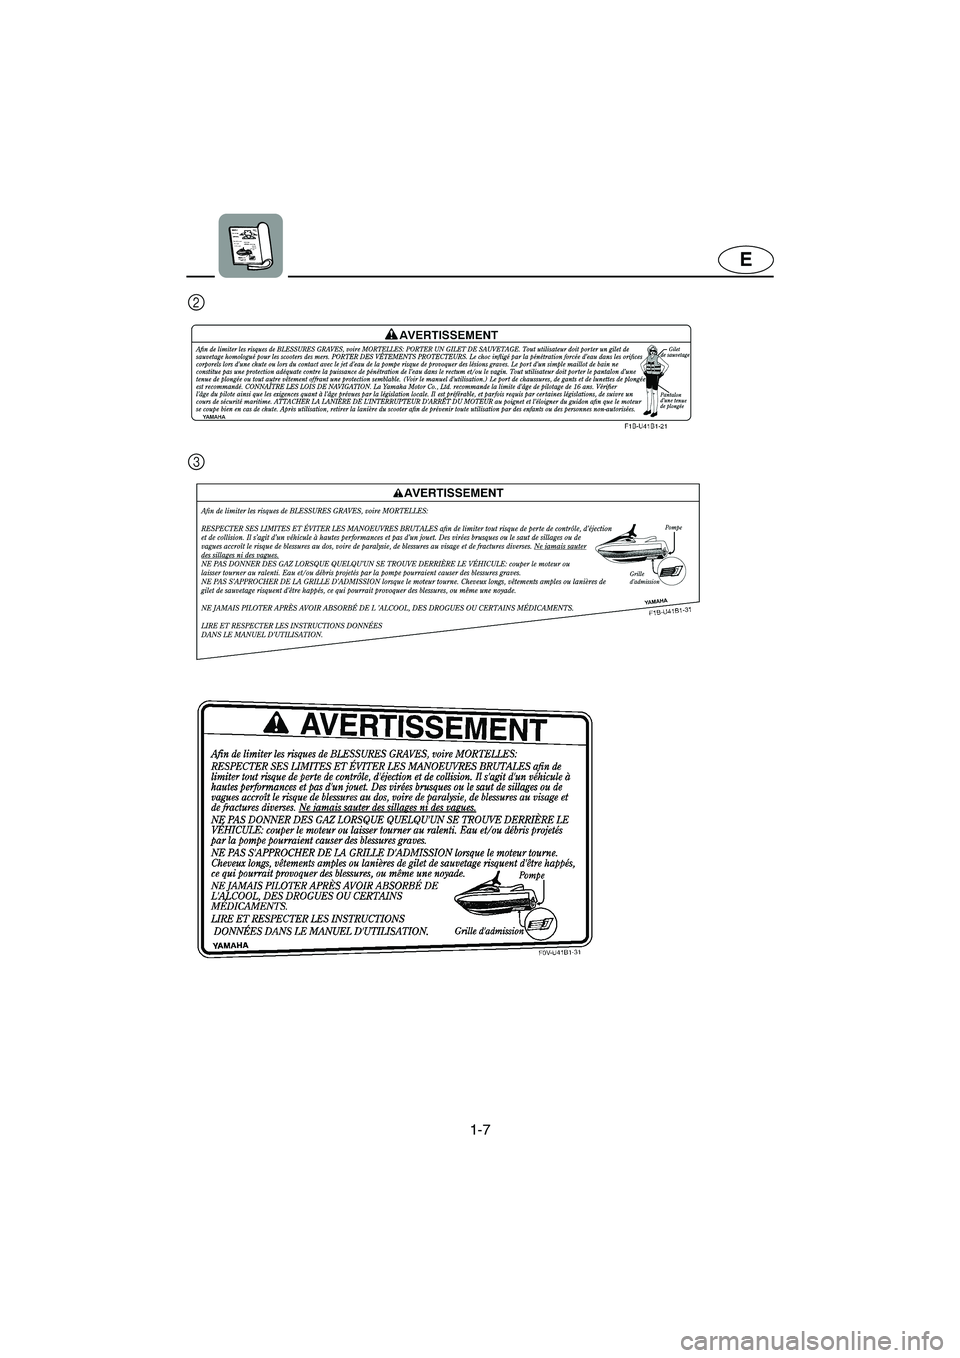 YAMAHA FX HO 2006 User Guide 1-7
E
3 2
E_F1X-70.book  Page 7  Friday, August 26, 2005  11:00 AM 